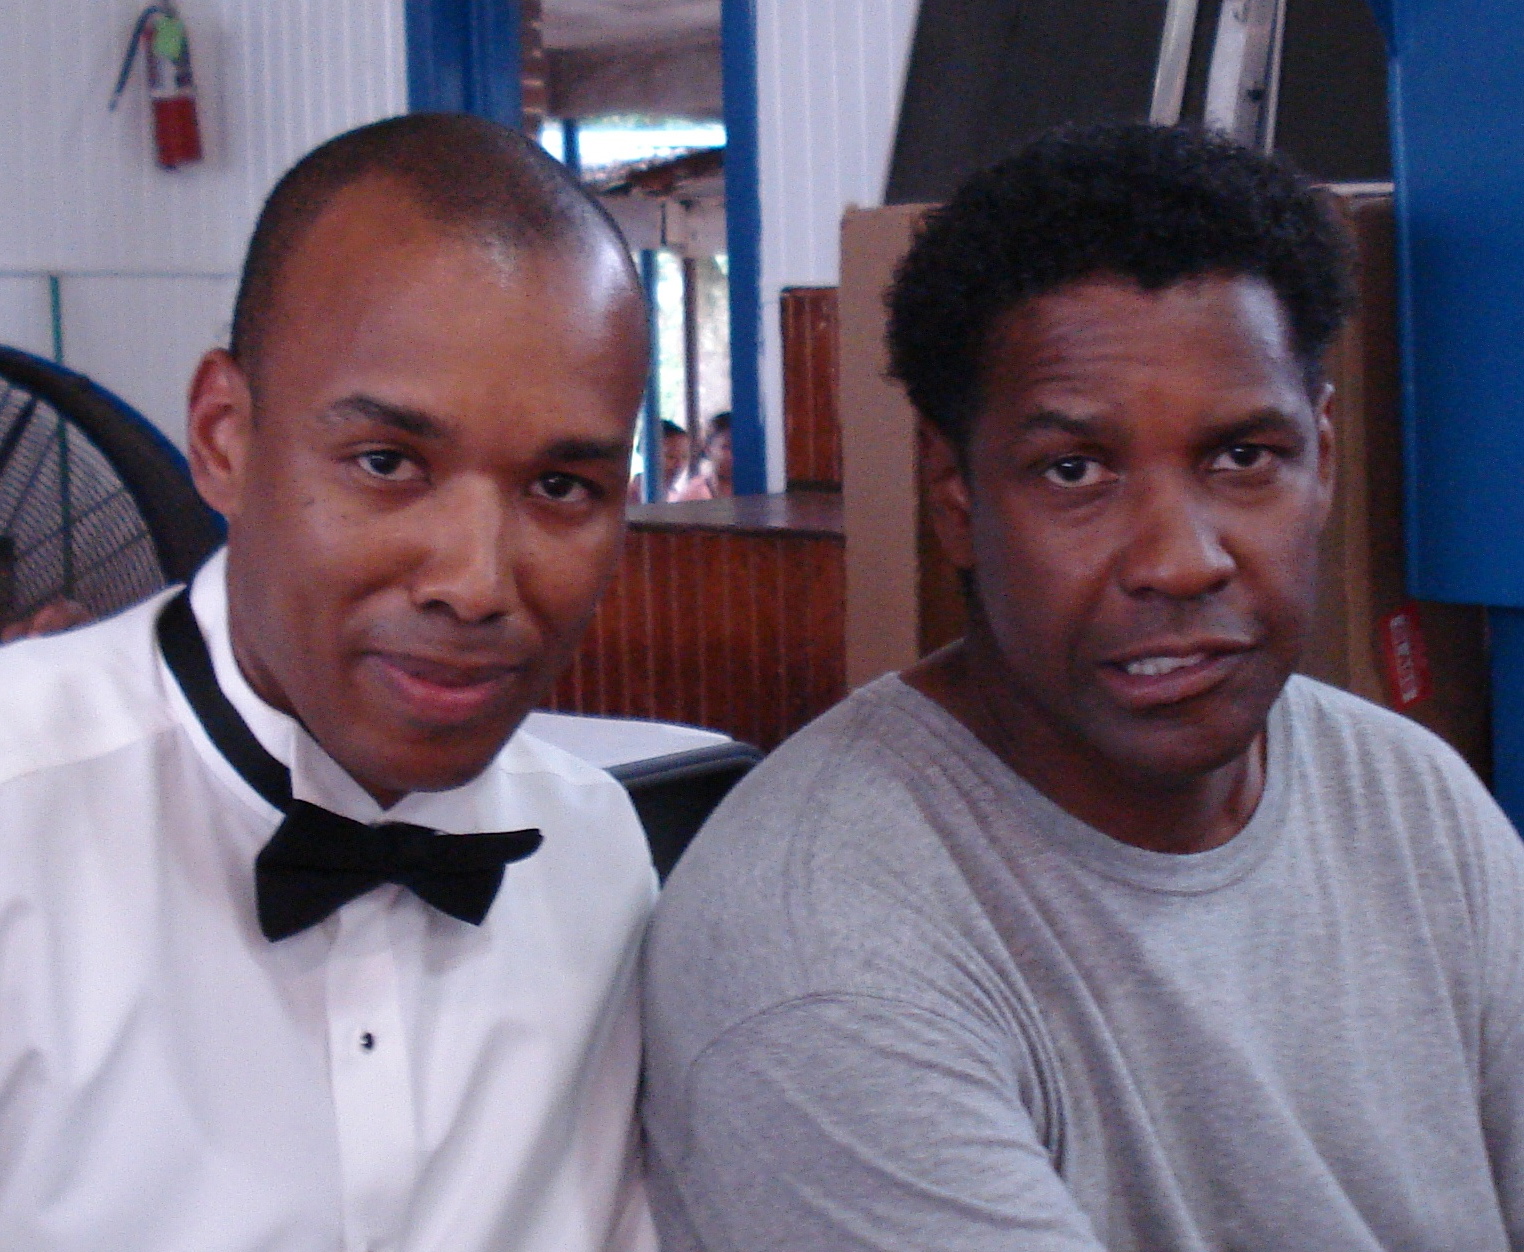 Marcus Lyle Brown and Denzel Washington from The Great Debaters.